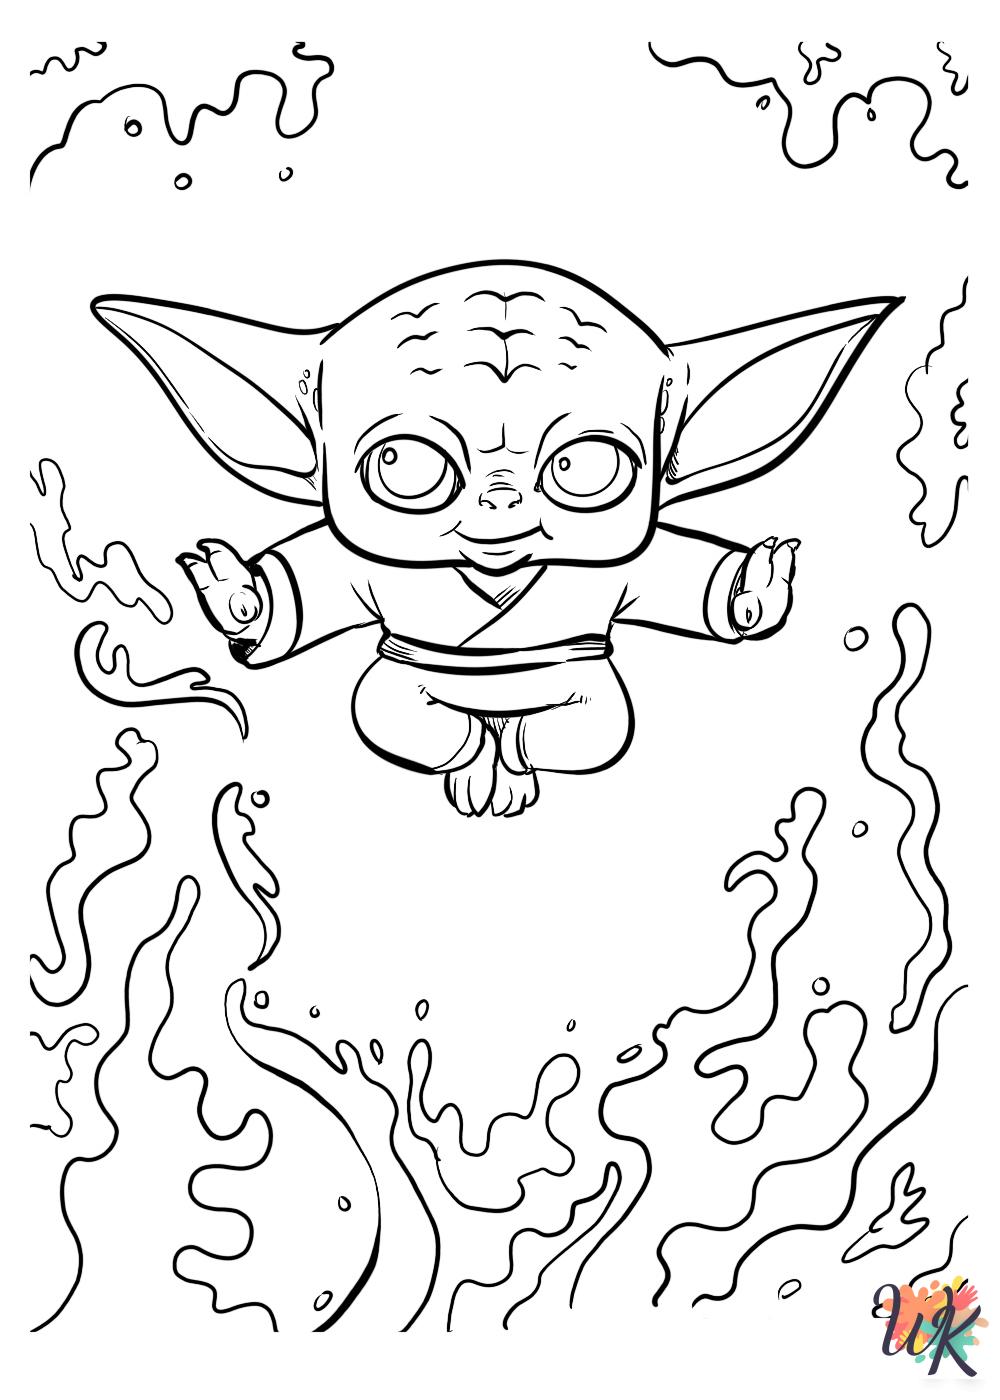 Baby Yoda coloring pages free printable